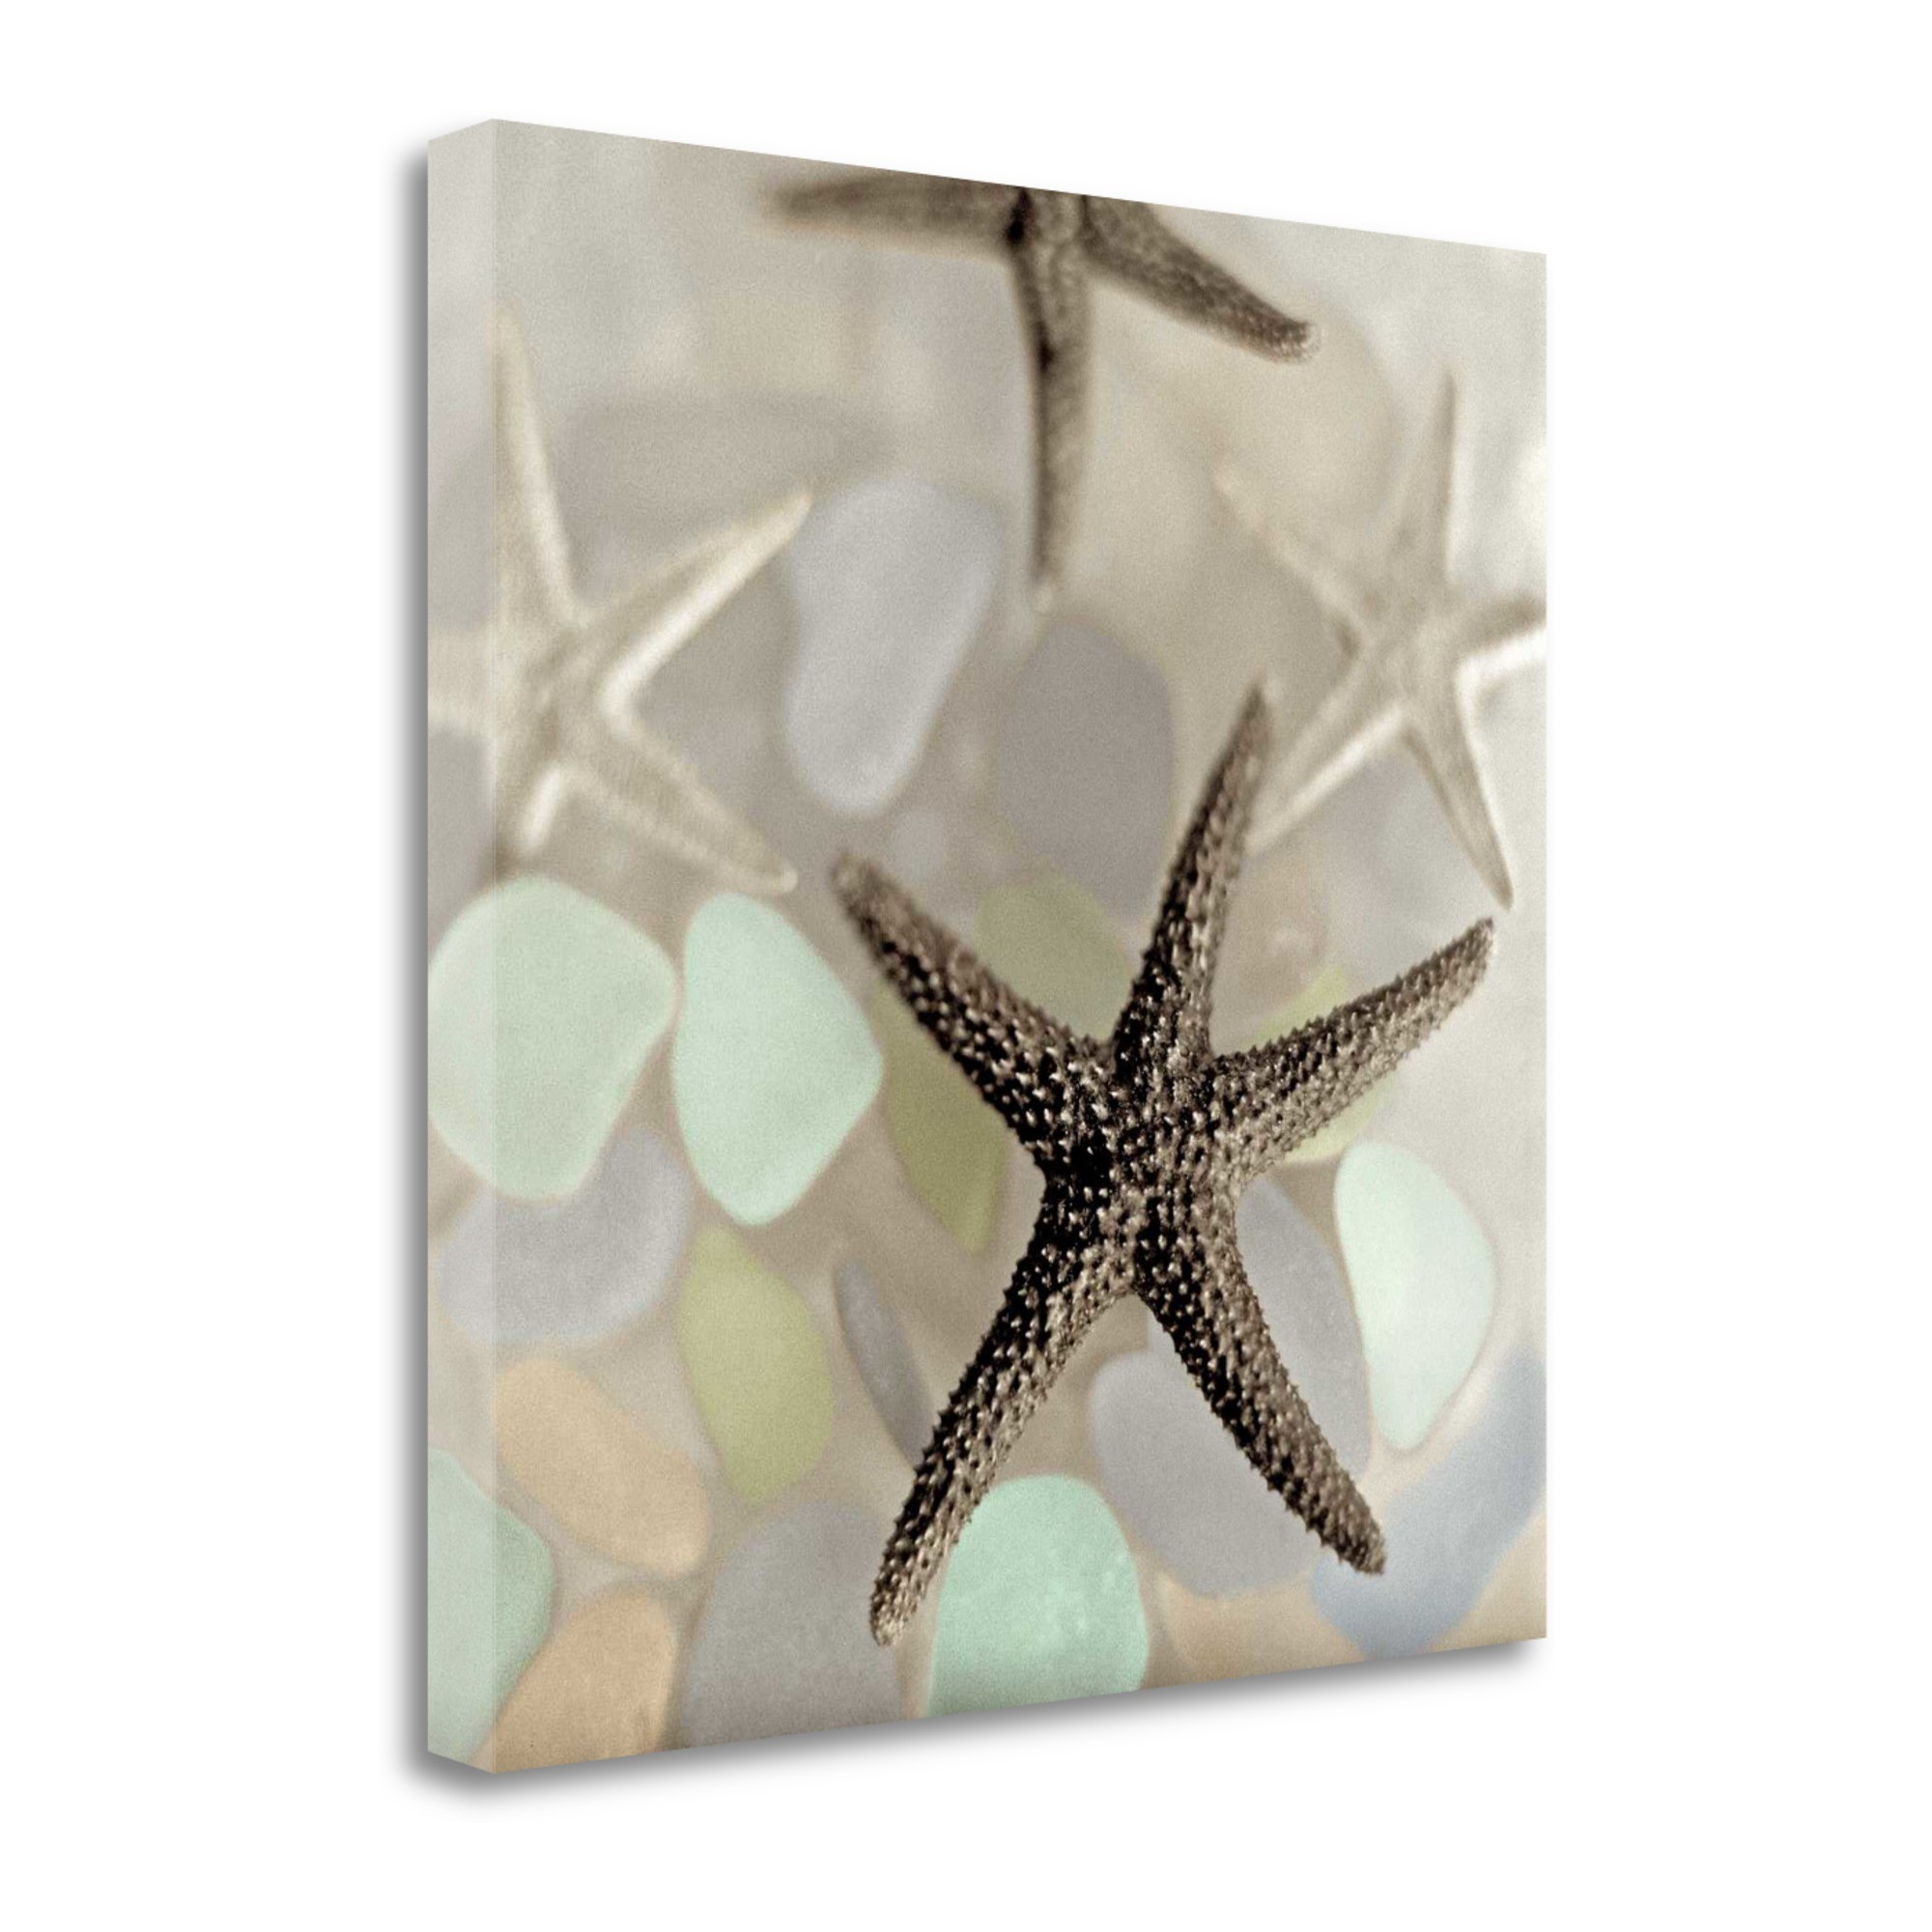 13" Four Starfish and Faded Seaglass 2 Giclee Wrap Canvas Wall Art